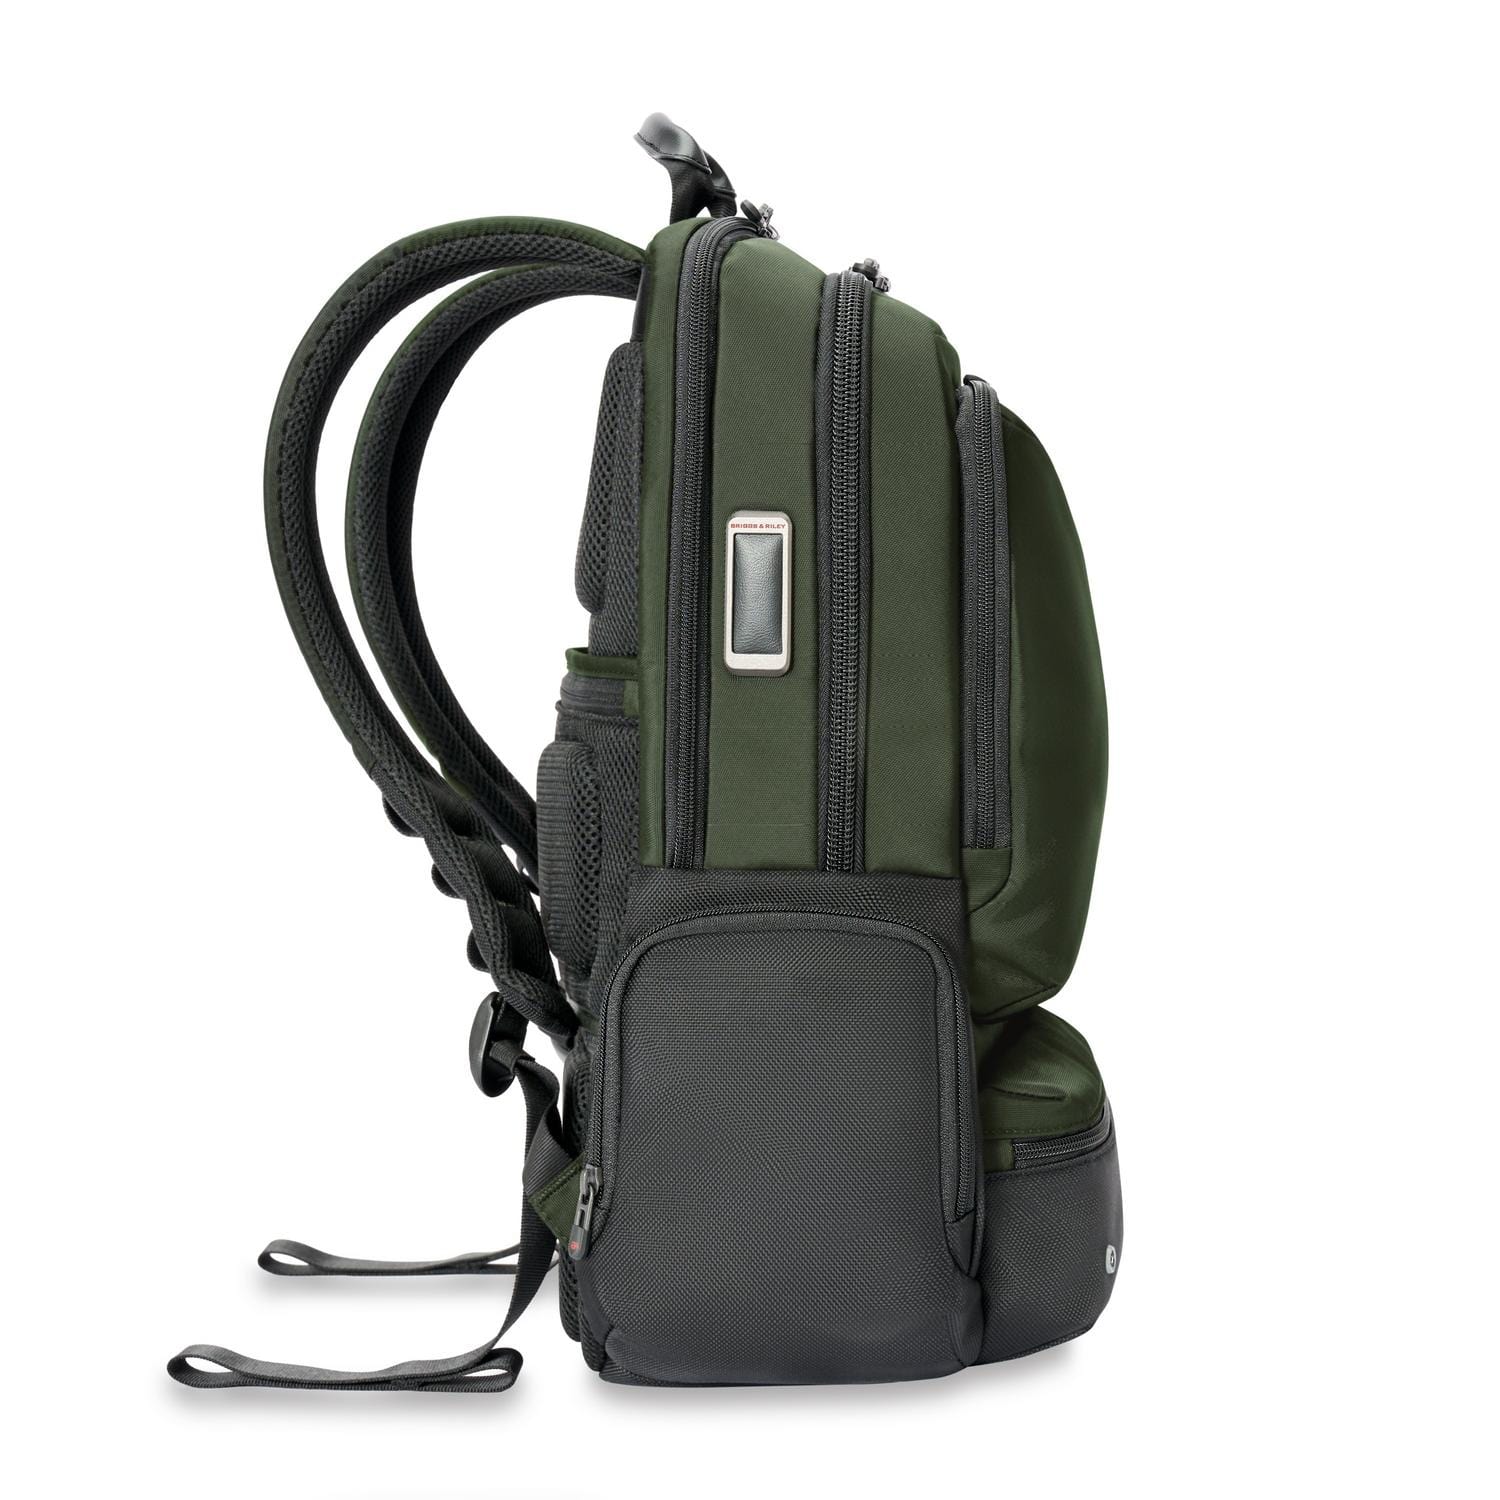 Briggs & Riley Large Cargo Backpack in Green